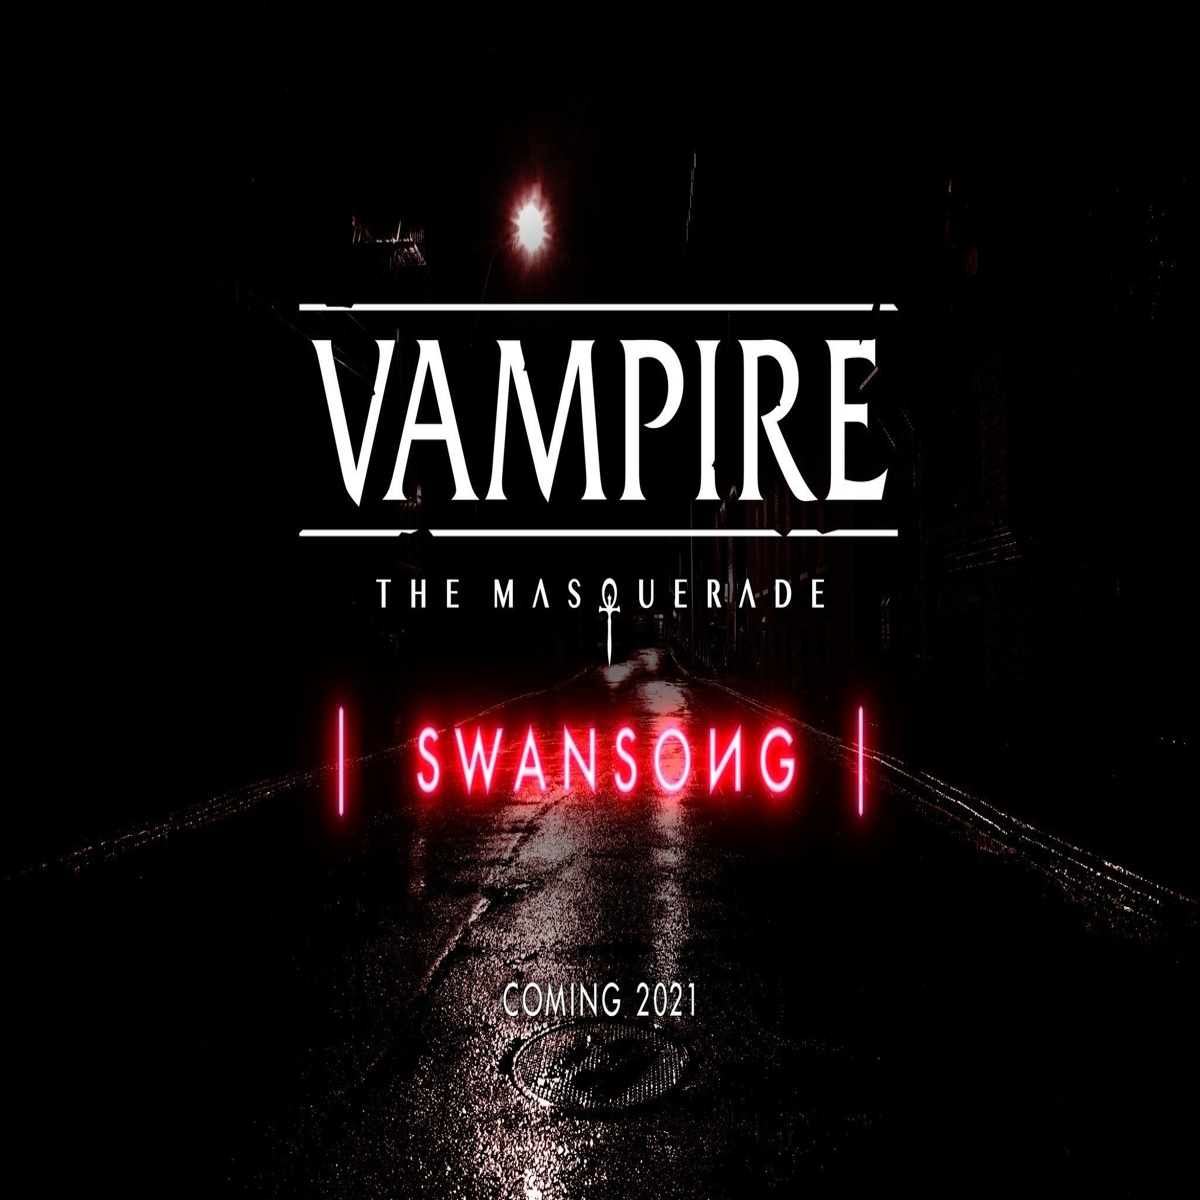 Vampire: The Masquerade - Swansong: A game of choices